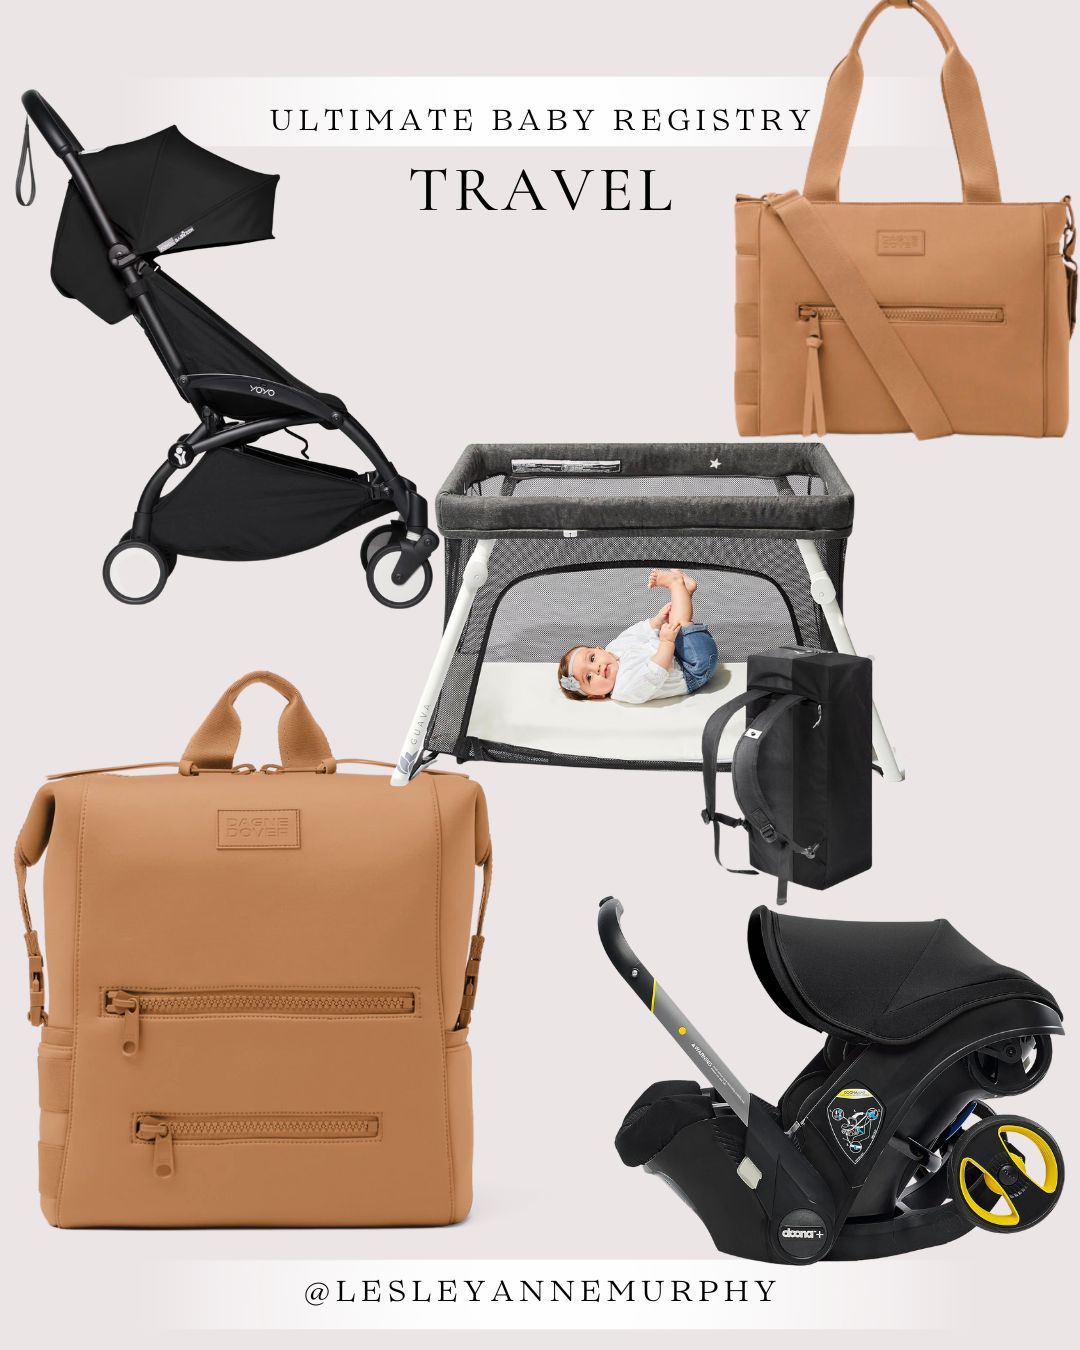 Our favorite diaper bags, travel stroller and packable pack and play